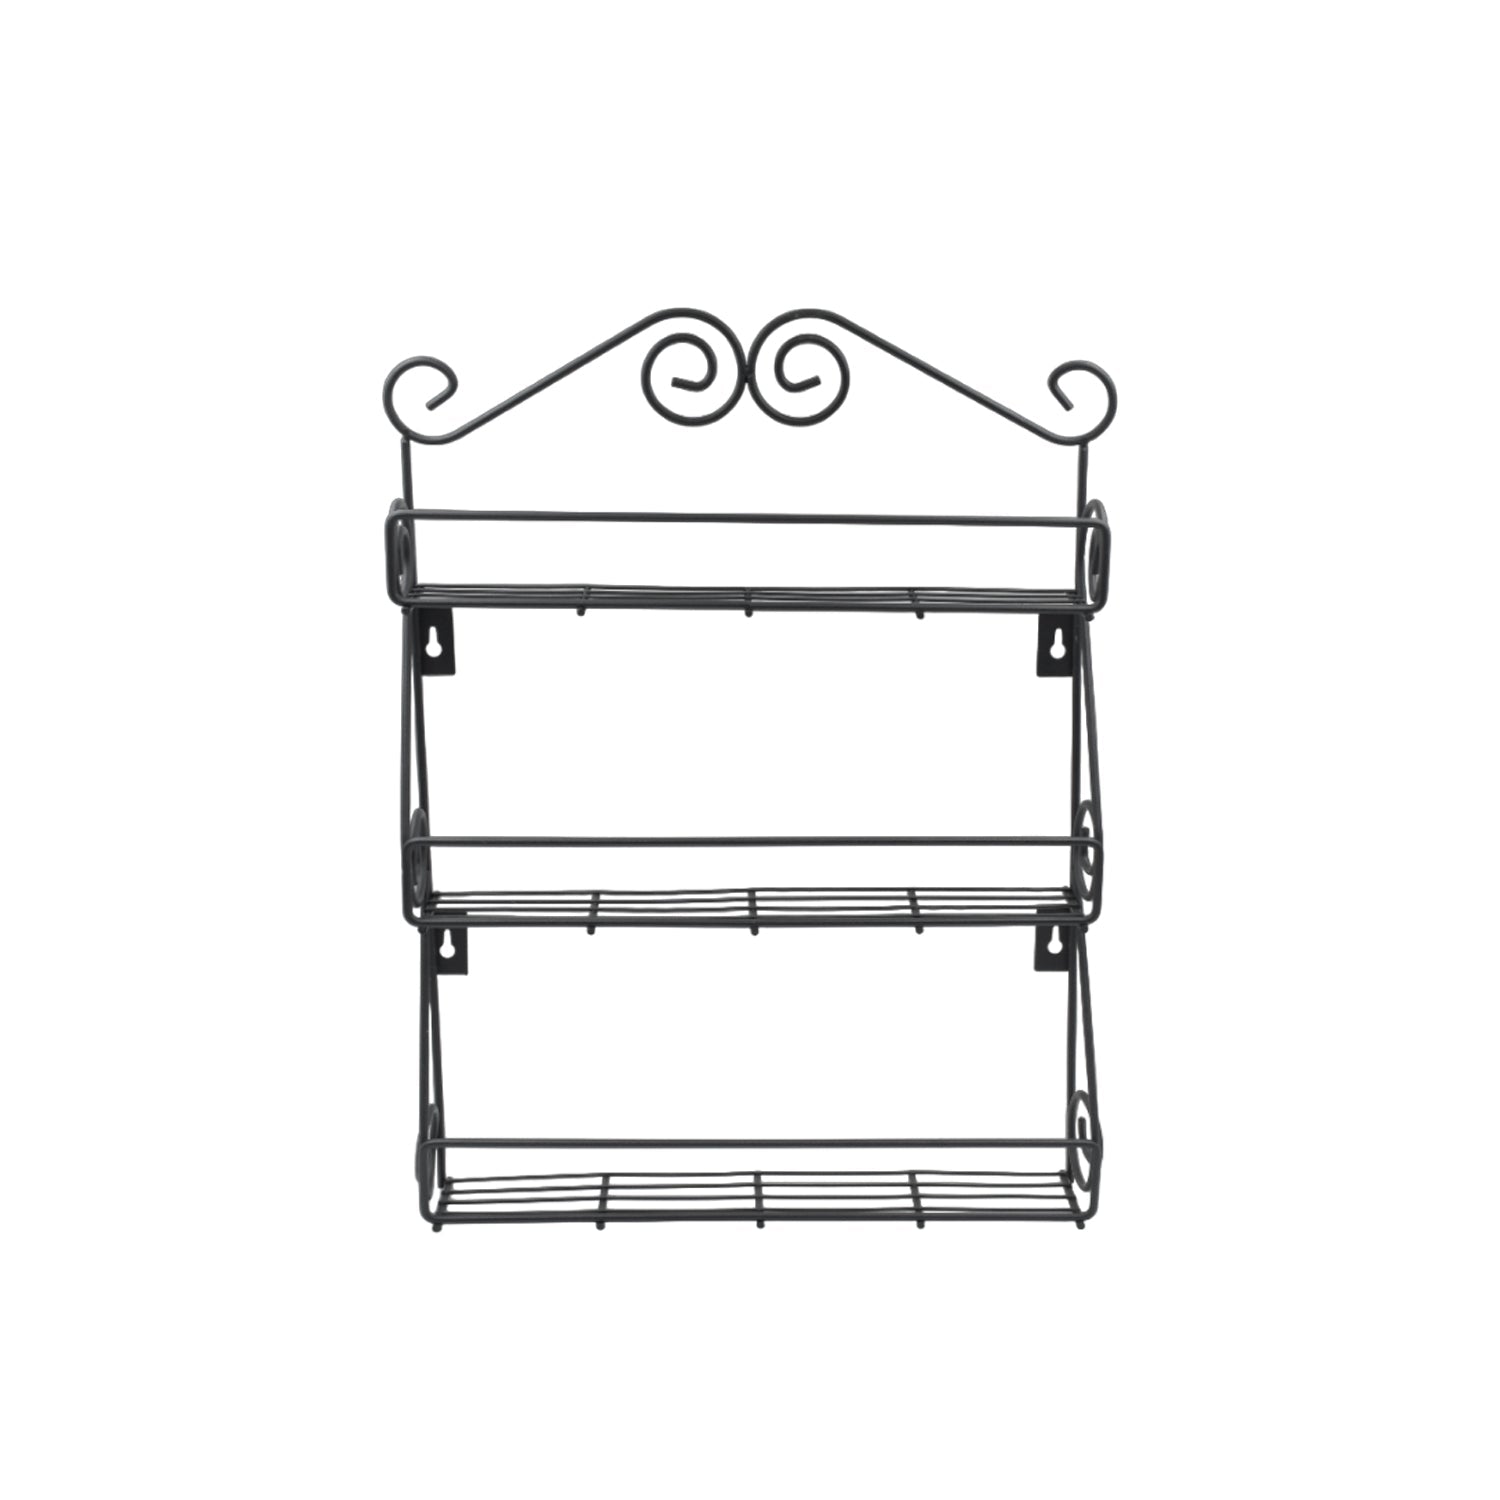 5857 Big Wall Mounted Iron Wall Shelf with 3 Storage Racks for Kitchen, Pantry, Cabinet, Counter top or Free Standing, Rack Holder for Kitchen